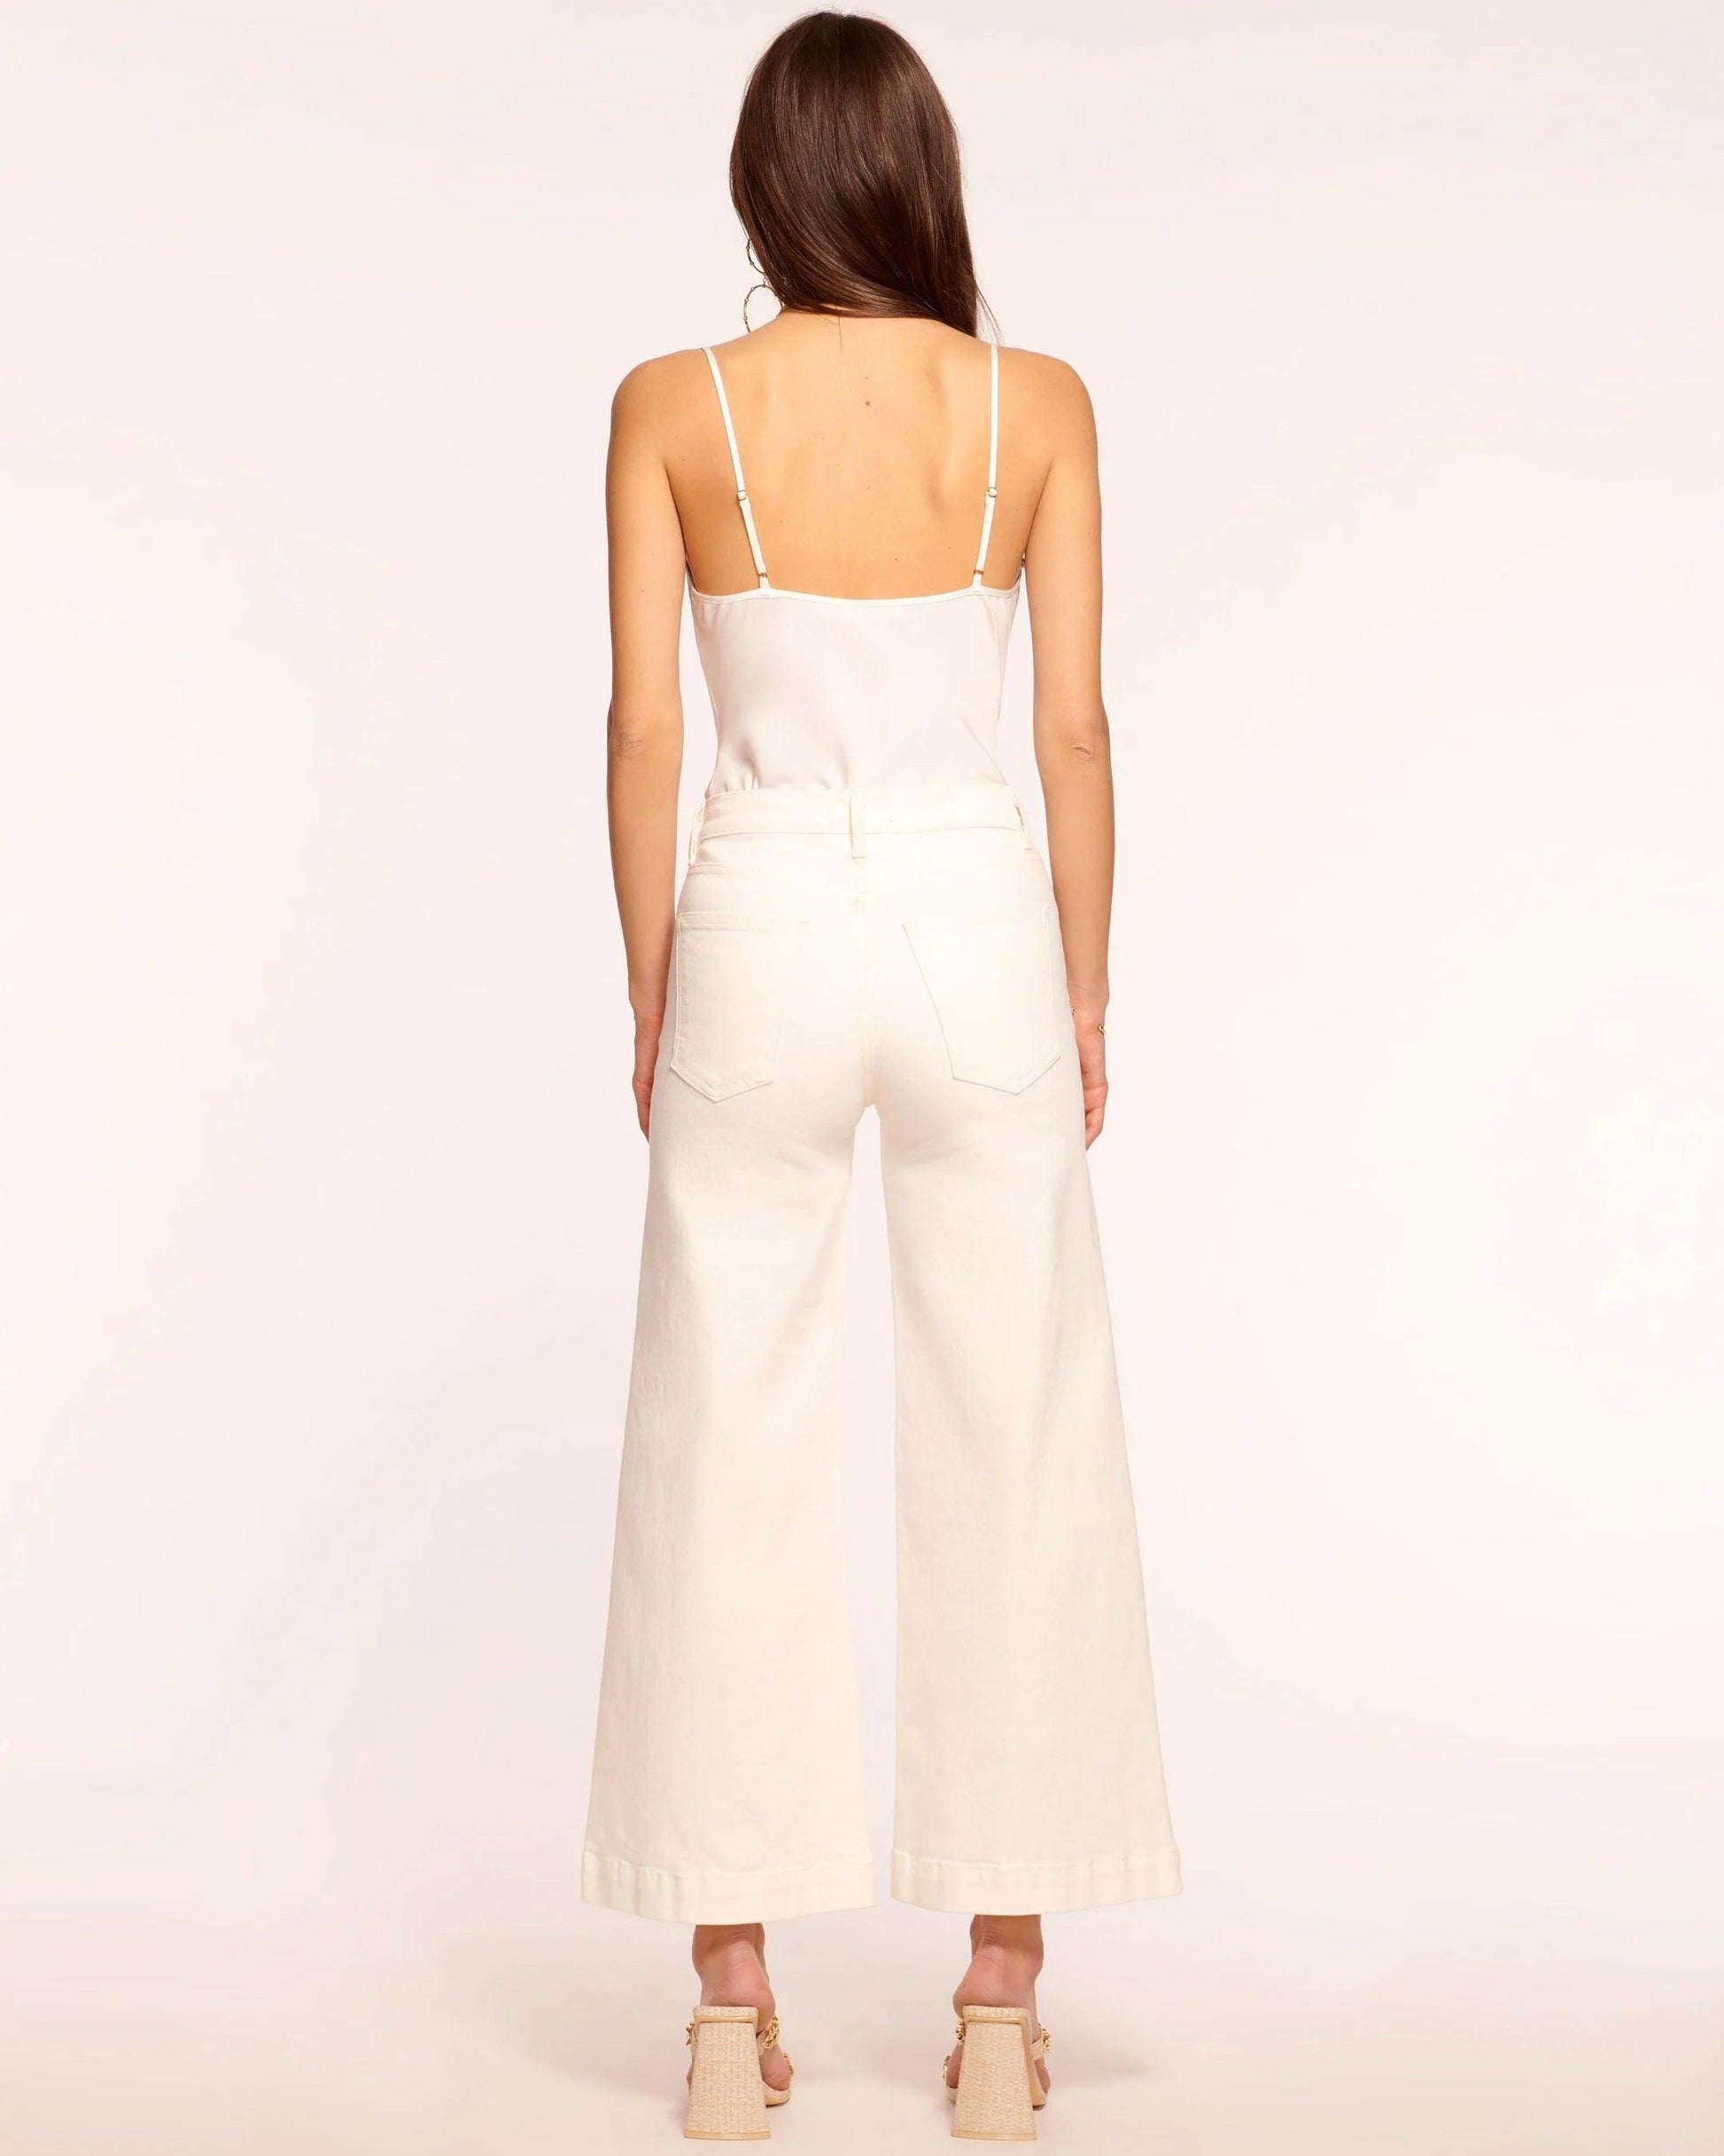 Cropped Tyra Jeans in White by Ramy Brook - Haven